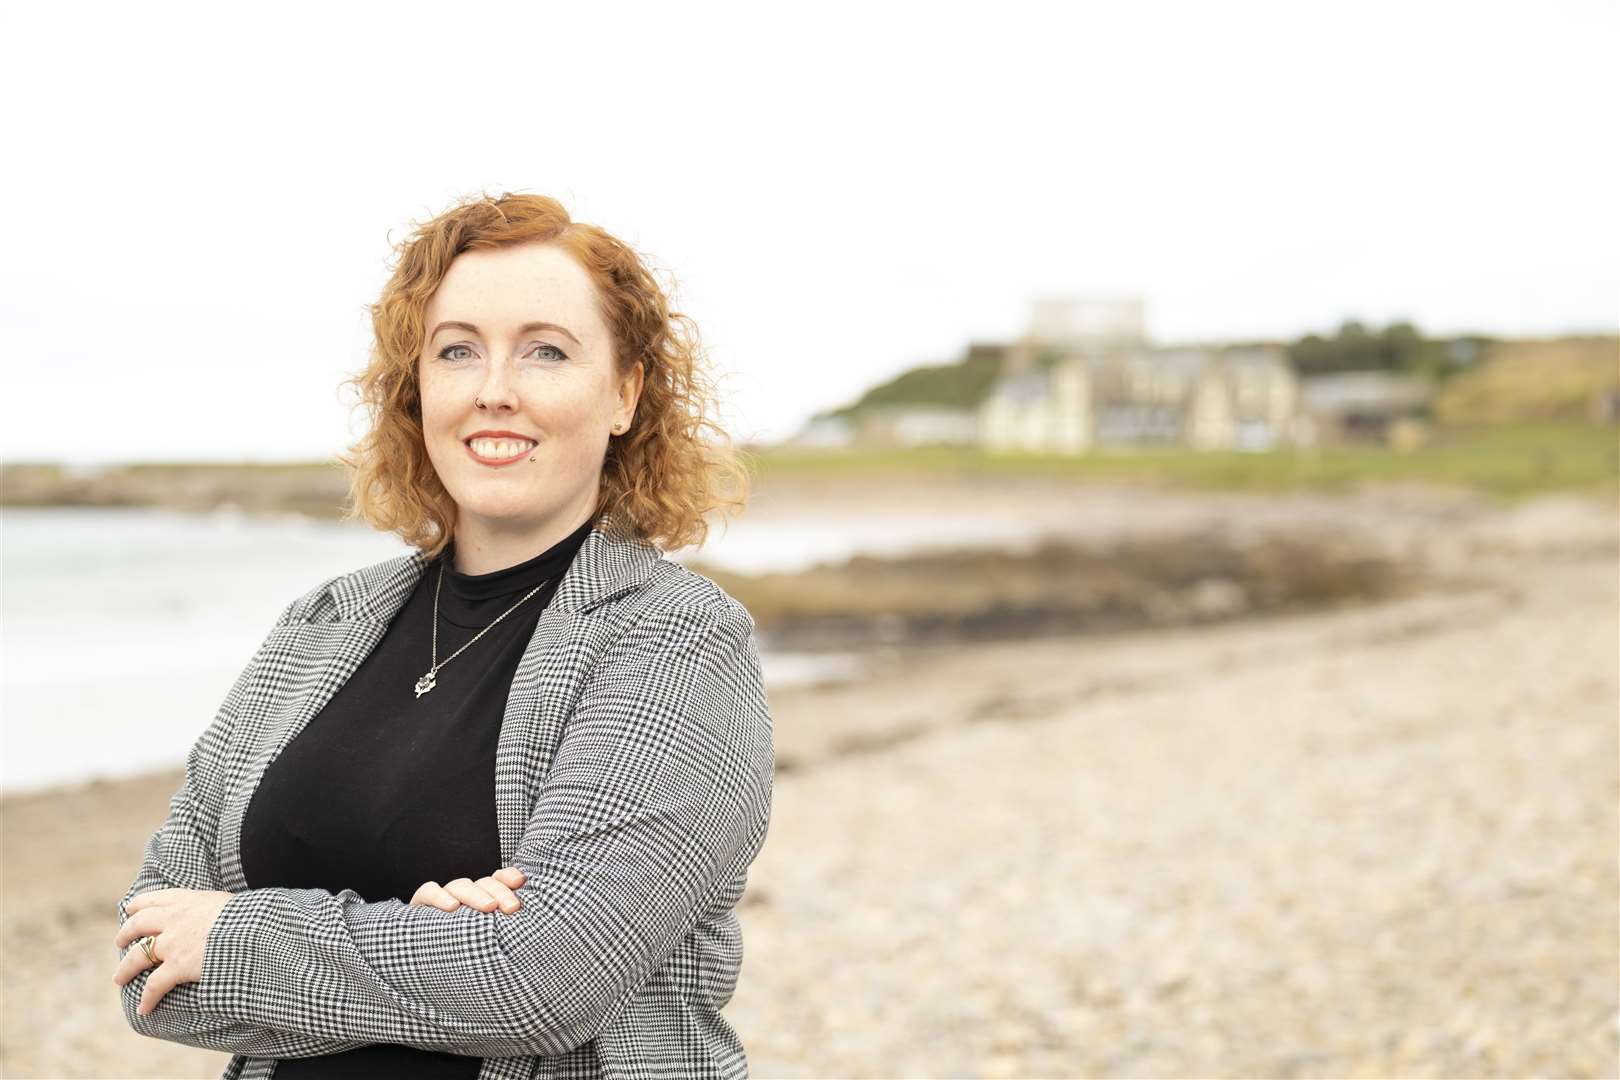 Labour's candidate for the Buckie by-election Keighly Goudie. Picture: Moray Labour